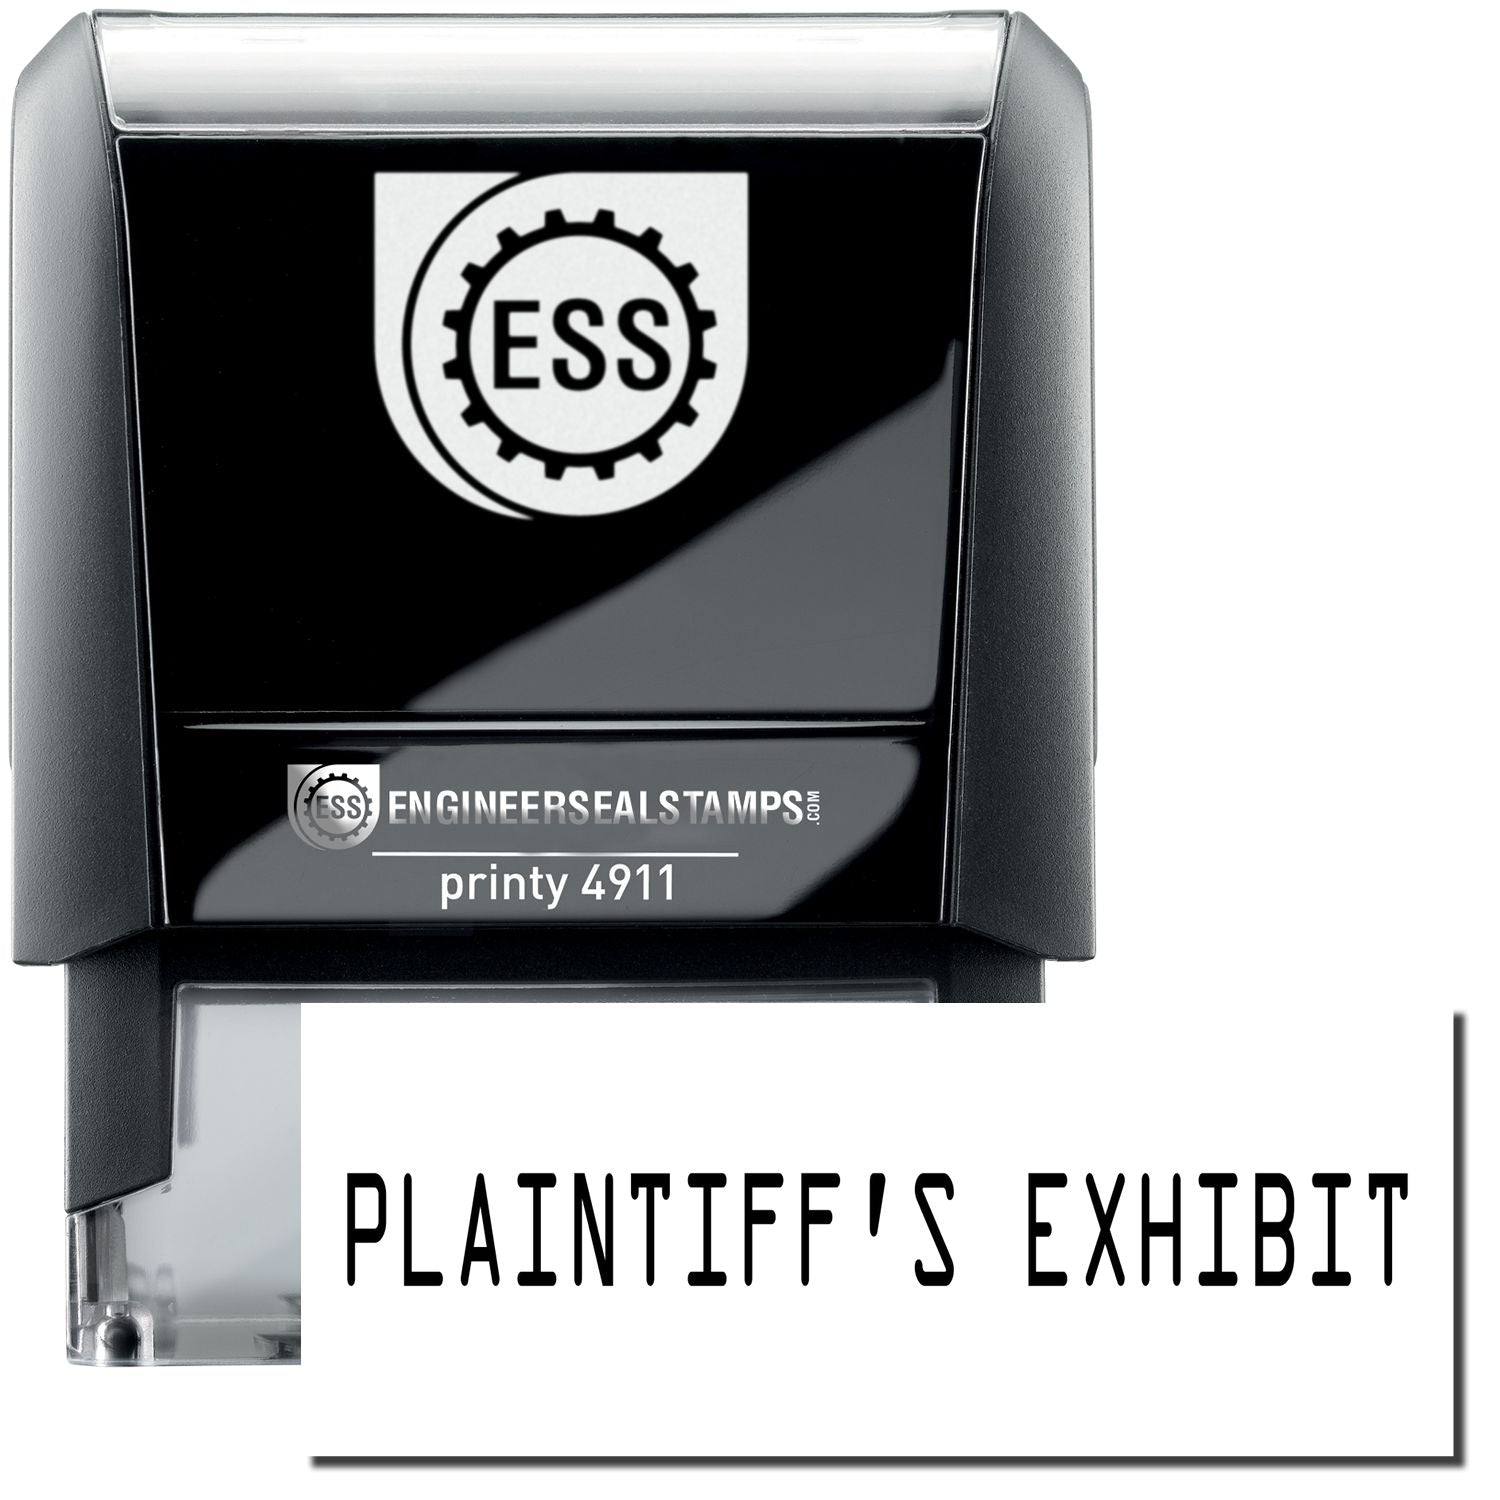 A self-inking stamp with a stamped image showing how the text "PLAINTIFF'S EXHIBIT" is displayed after stamping.